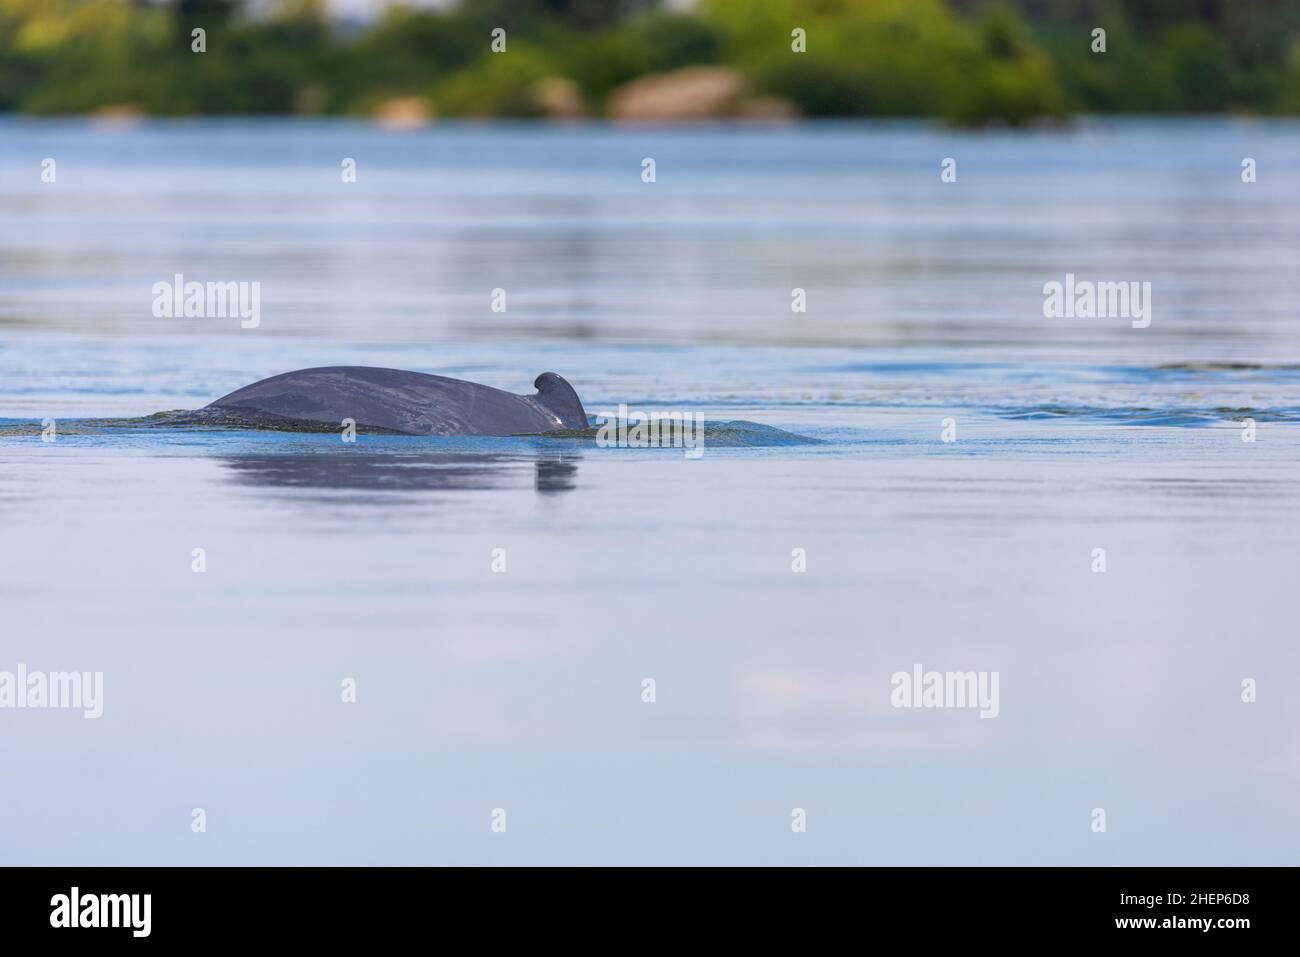 The Irrawaddy dolphin (Orcaella brevirostris) on the Mekong River, Cambodia Stock Photo